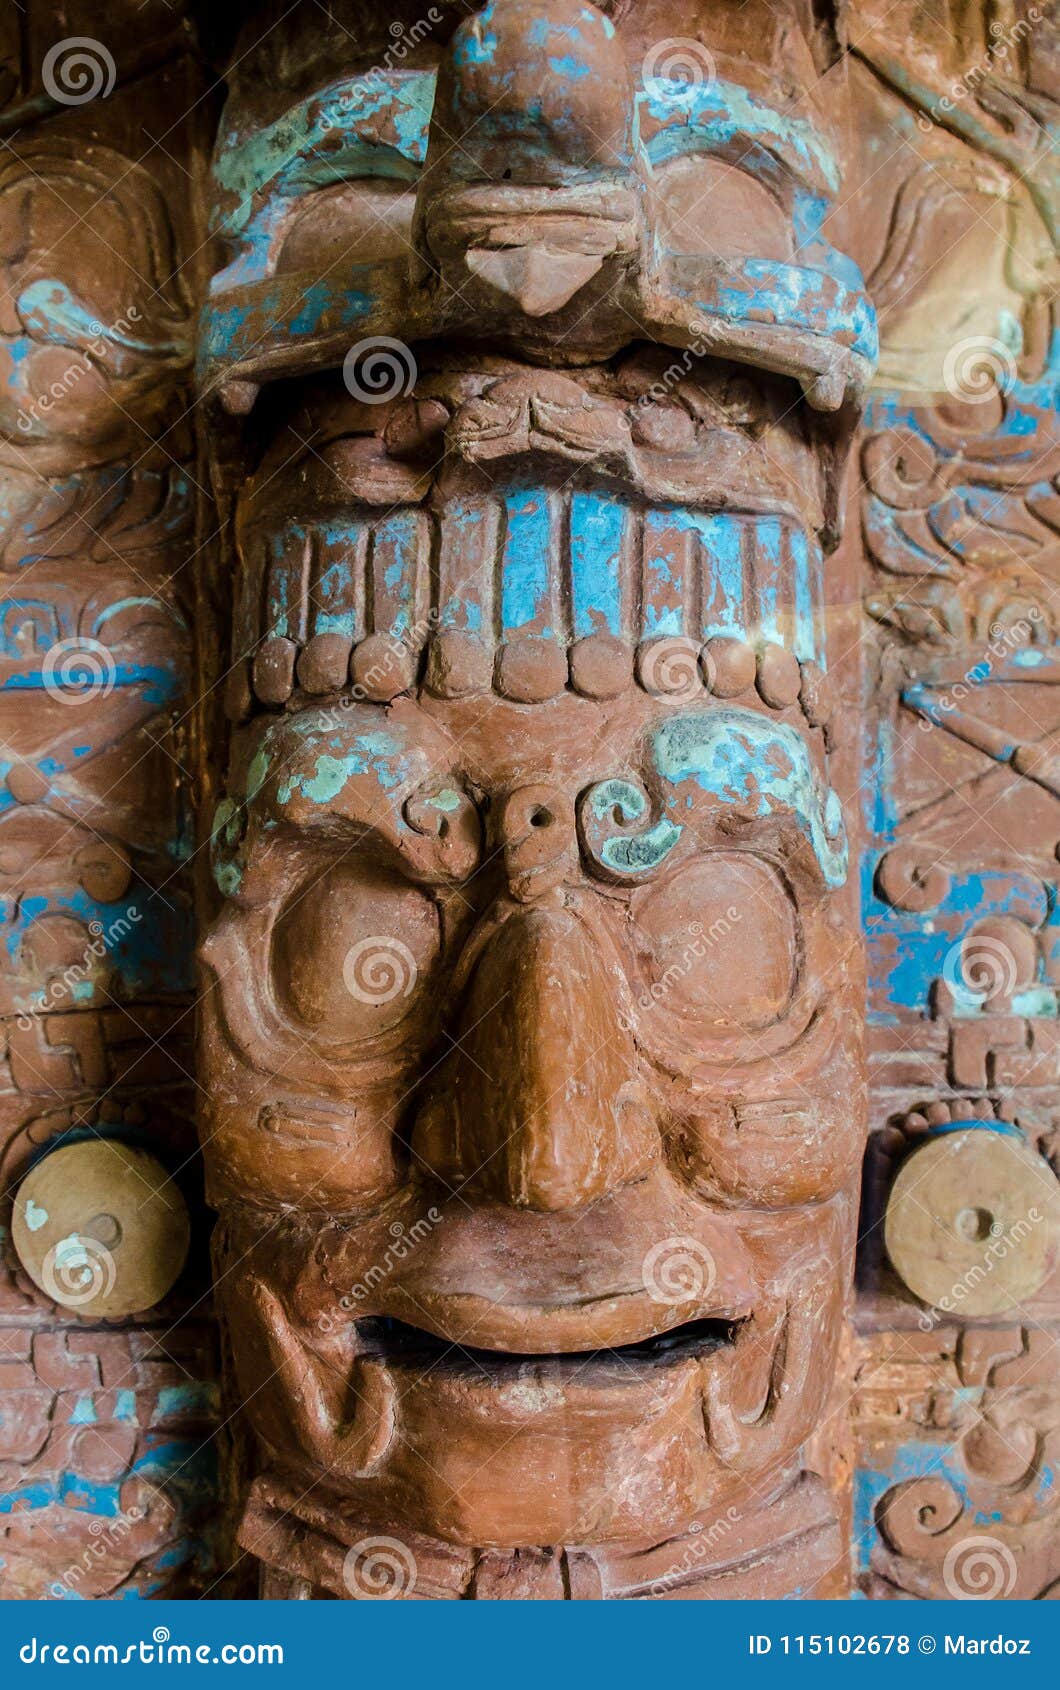 ancient mayan face of clay at a museum